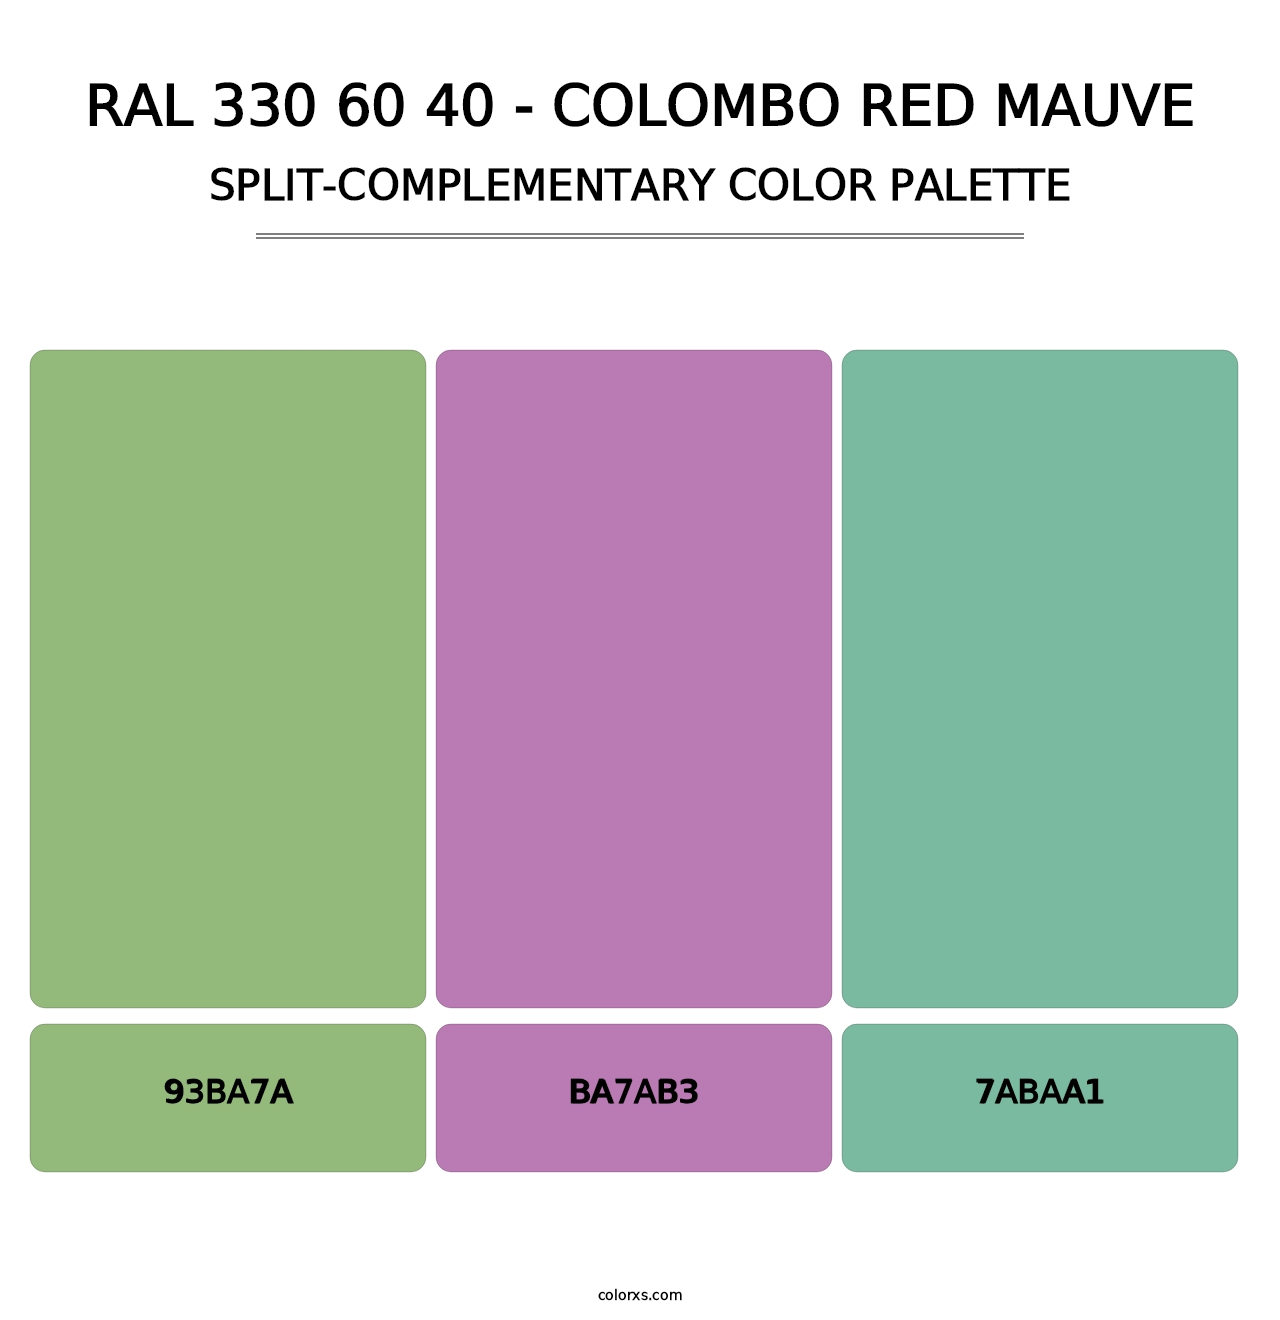 RAL 330 60 40 - Colombo Red Mauve - Split-Complementary Color Palette